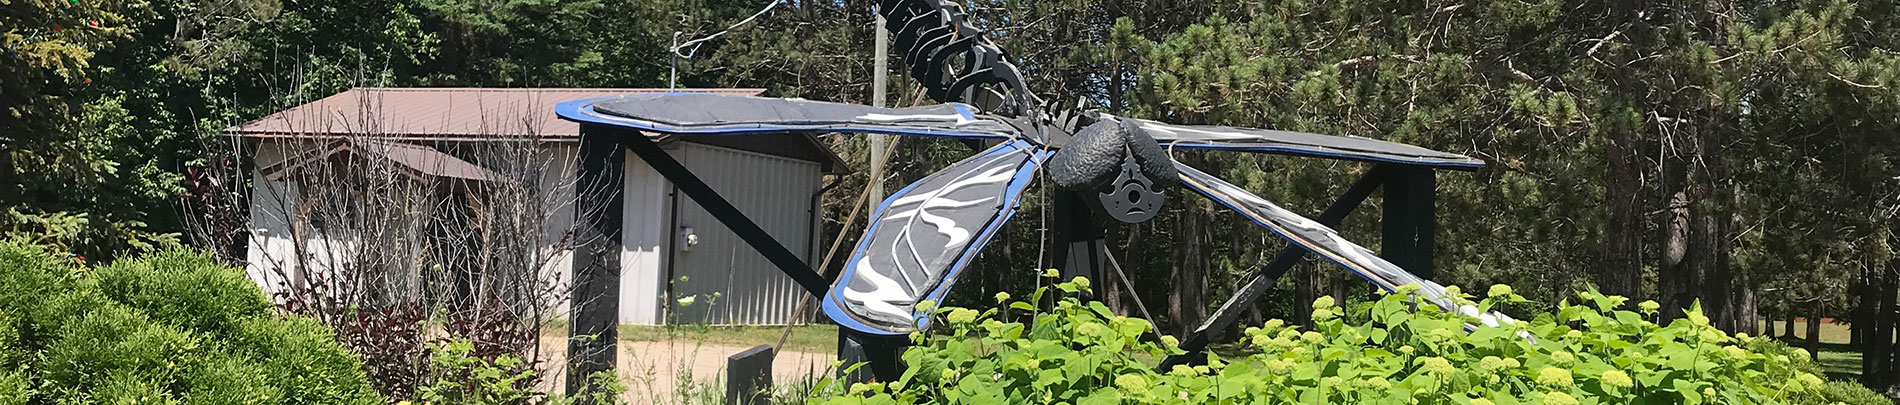 Dragonfly sculpture located in Cardiff, Ontario